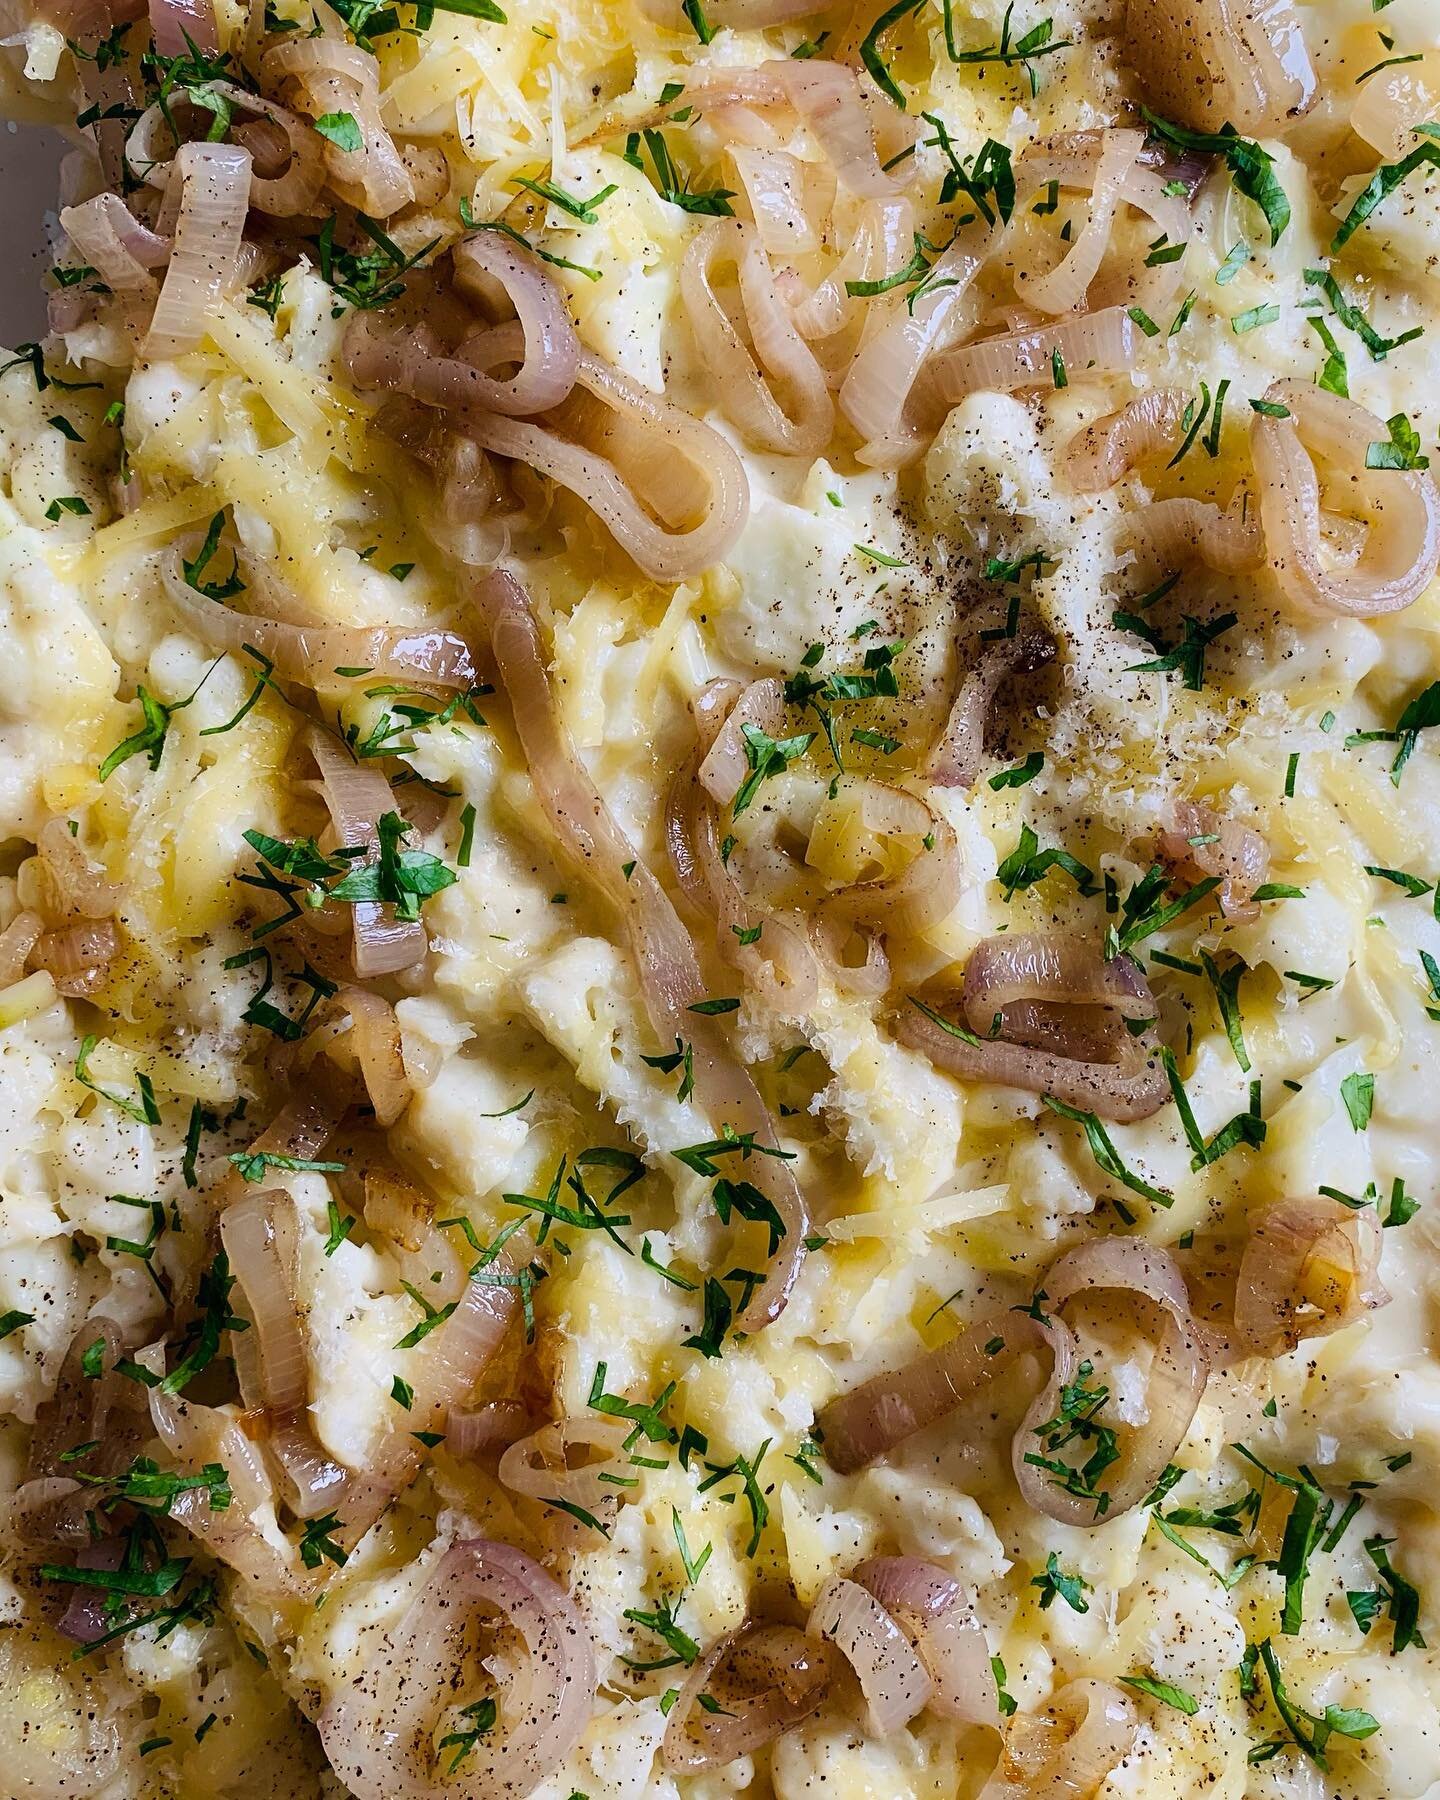 Cauliflower unidentifiable in this creamy, cheesy, shallot-y casserole, but it&rsquo;s in there!